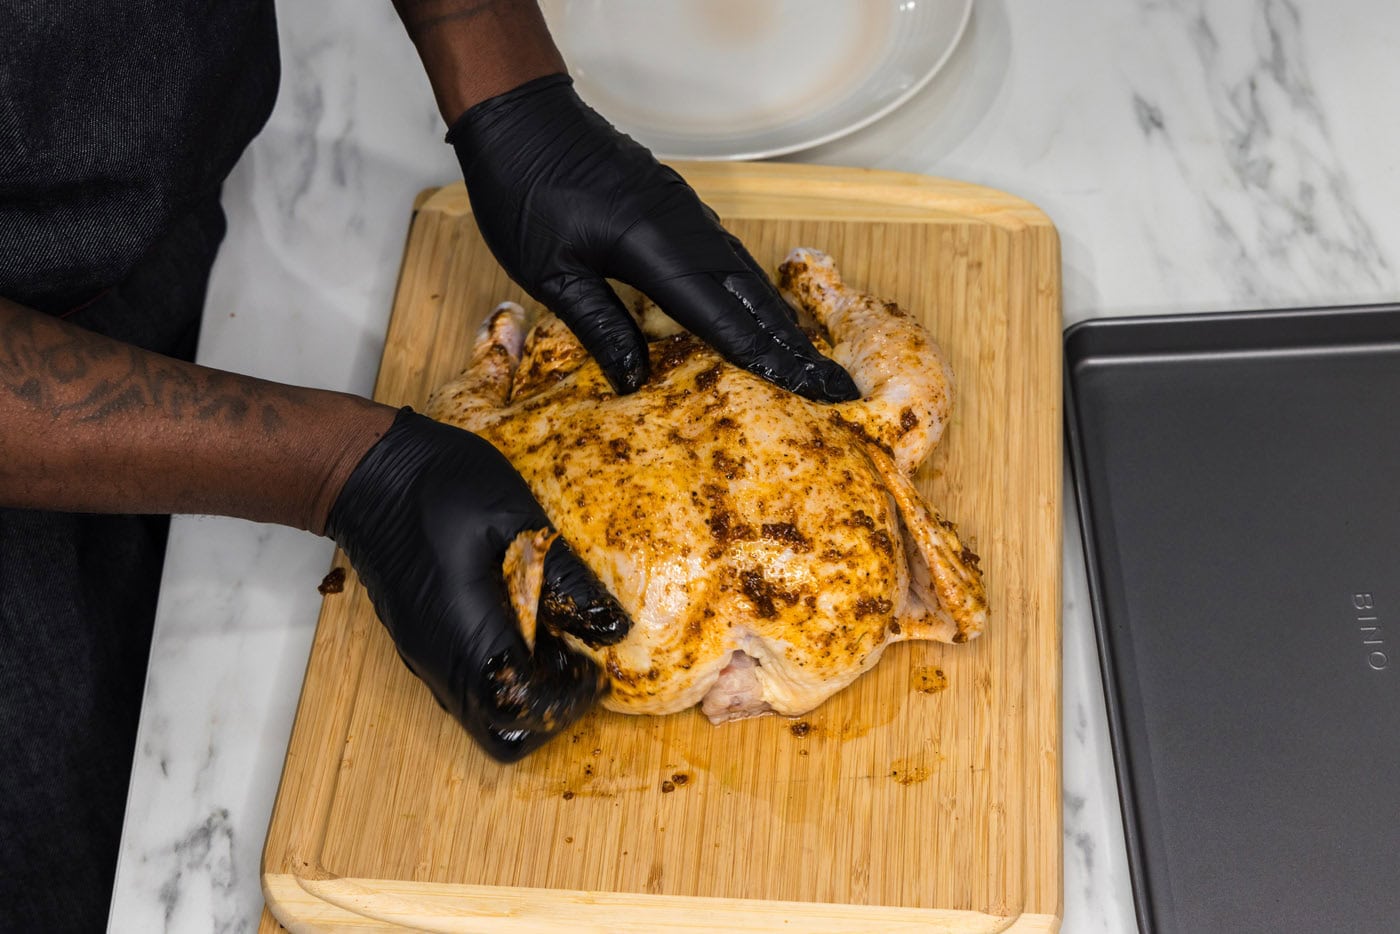 rubbing oil and seasonings over whole chicken